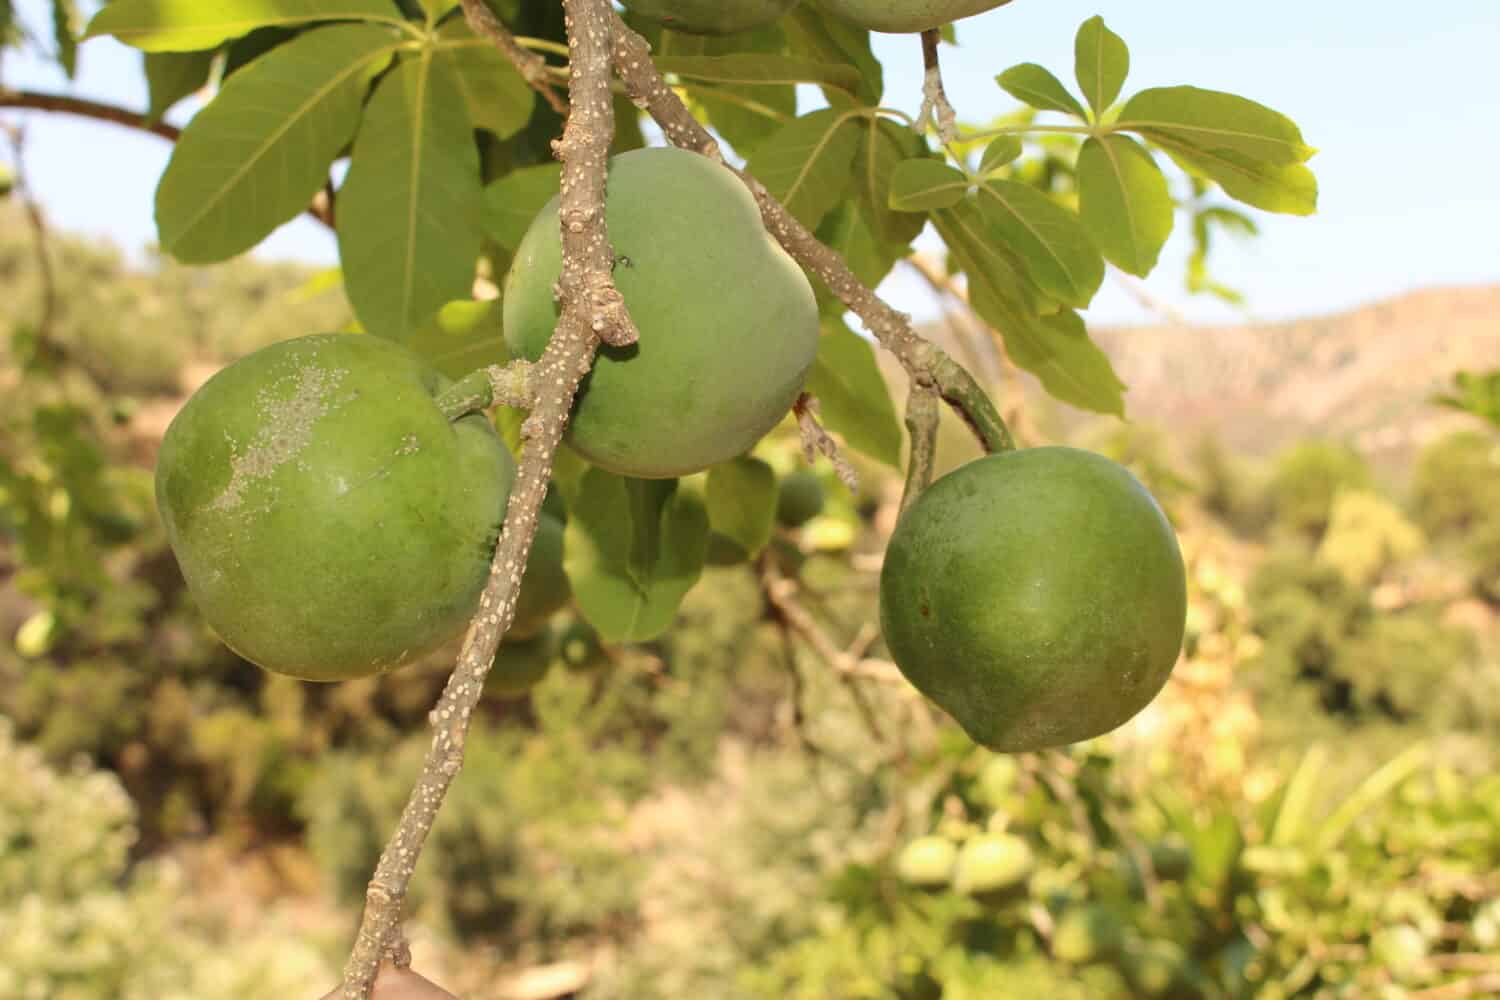 Unripe and green "White Sapote" fruit (or Mexican Apple, Casimiroa) on the tree in Crete Island, Greece. Its Latin name is Casimiroa Edulis, native to eastern Mexico. 